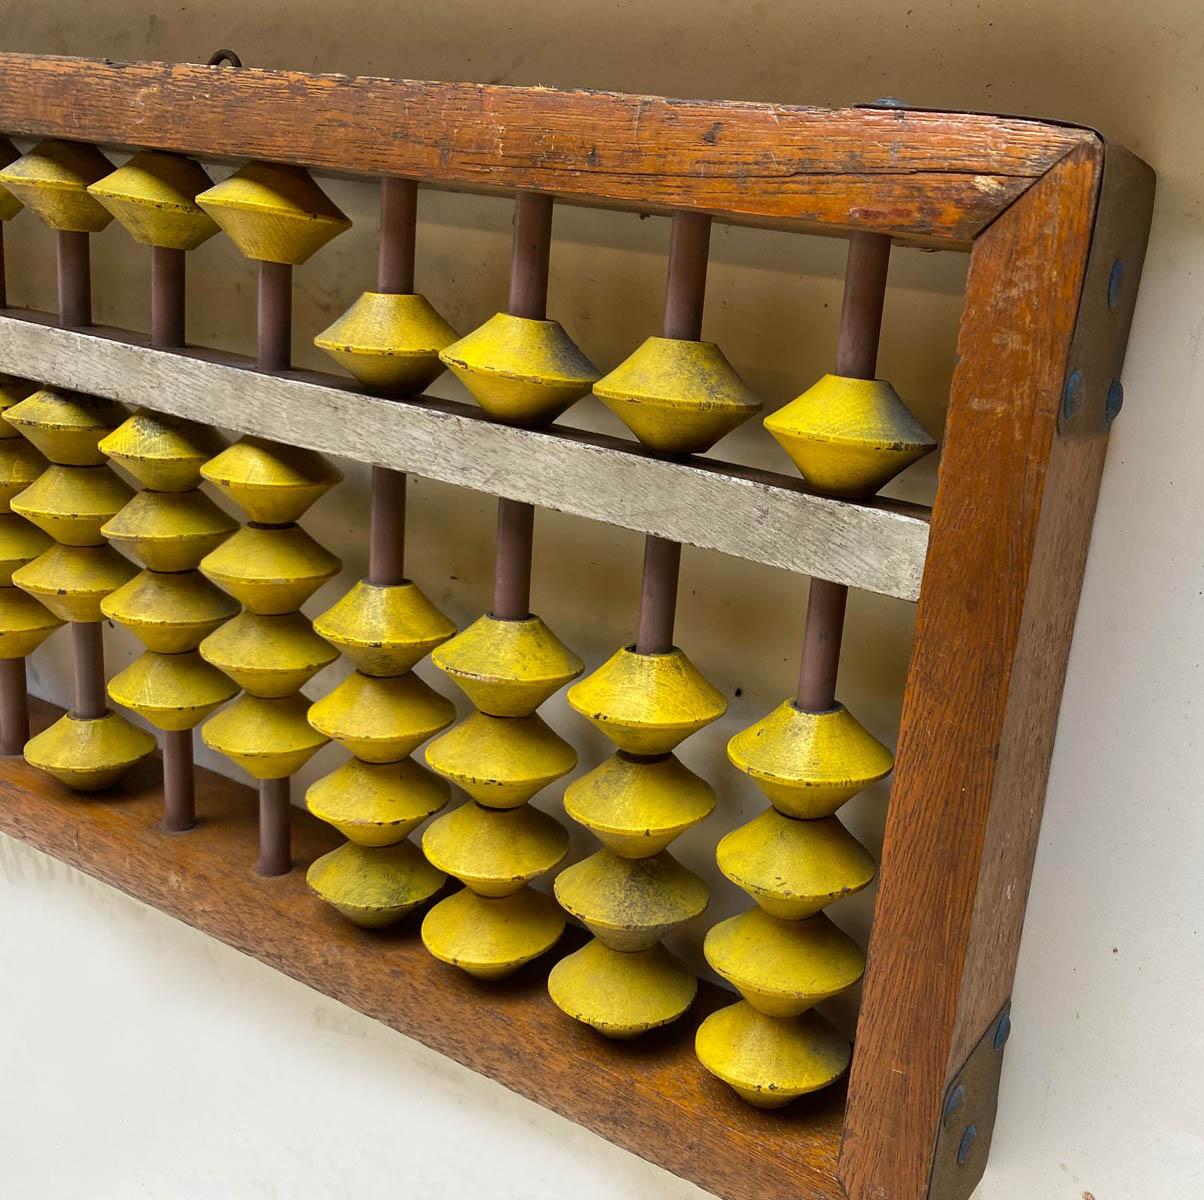 Vintage Japanese abaci. Each abacus is sold separately.
Original paint. Colorful.
The top measures 40 x 10 x 2 inches thick and the bottom measures 45 x 11.5 x 2 inches thick.
These look great on the wall!